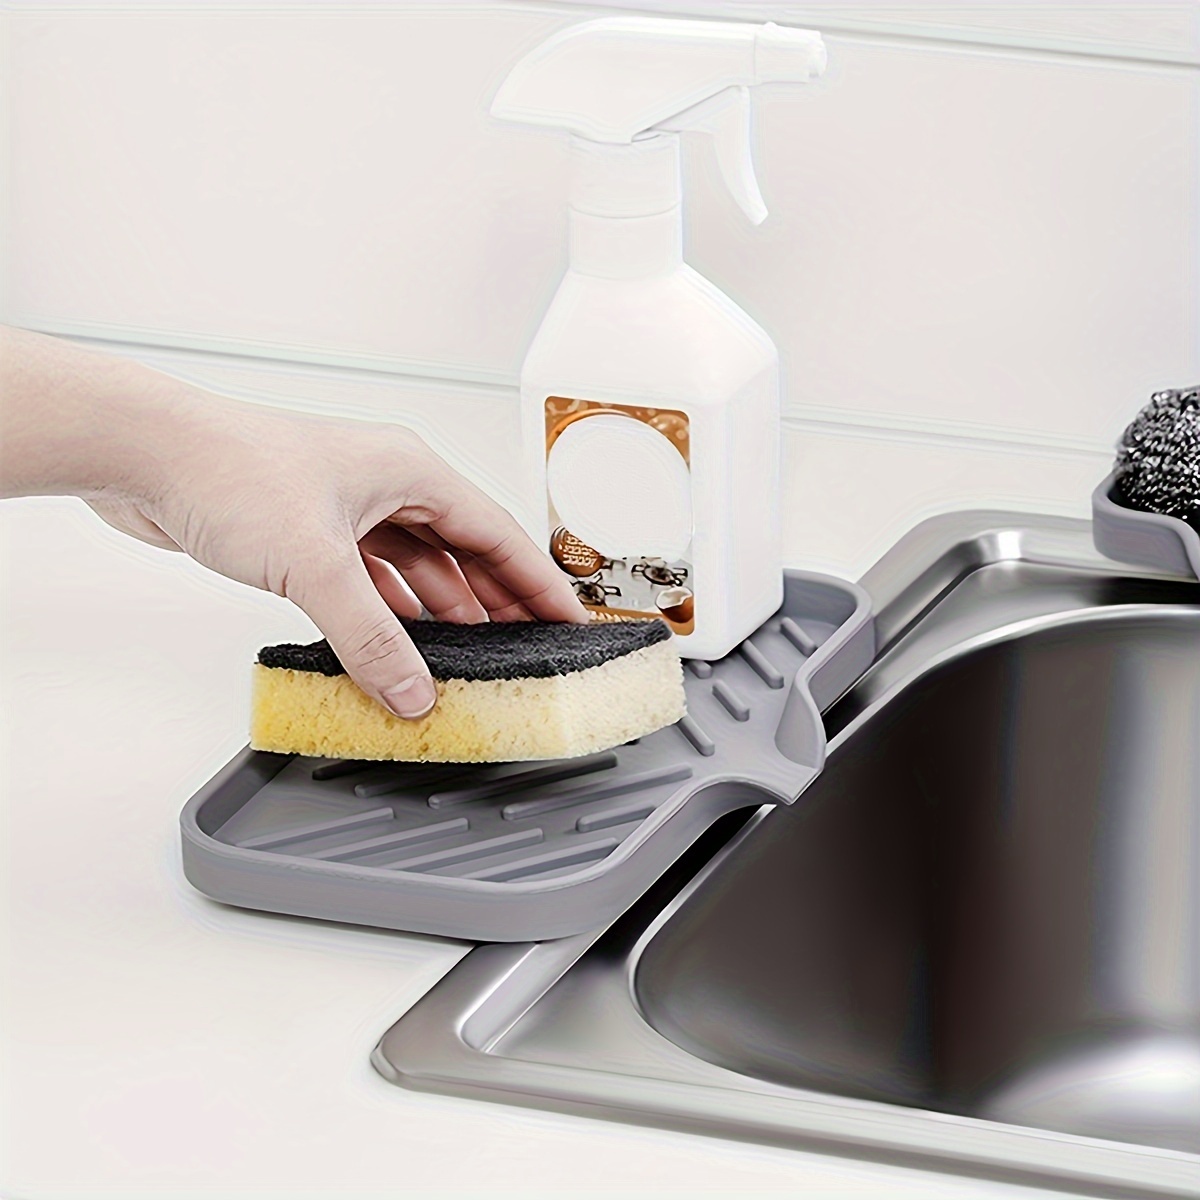 1Pcs Silicone Kitchen Soap Tray, Sink Tray for Kitchen Counter